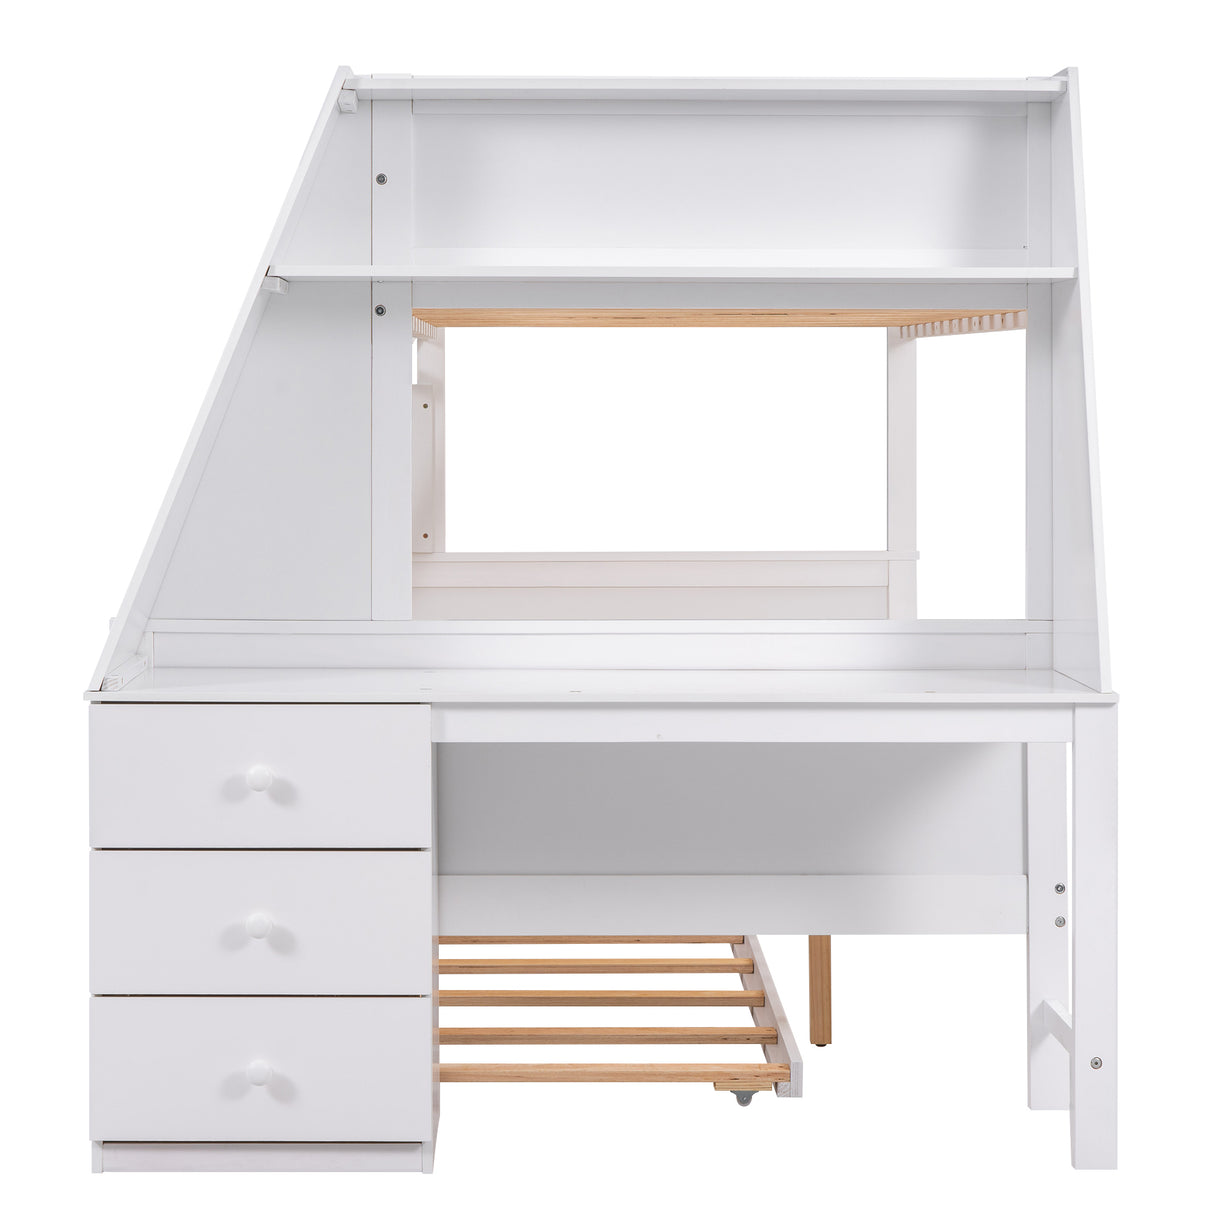 Twin over Full Bunk Bed with Trundle and Built-in Desk, Three Storage Drawers and Shelf,White - Home Elegance USA